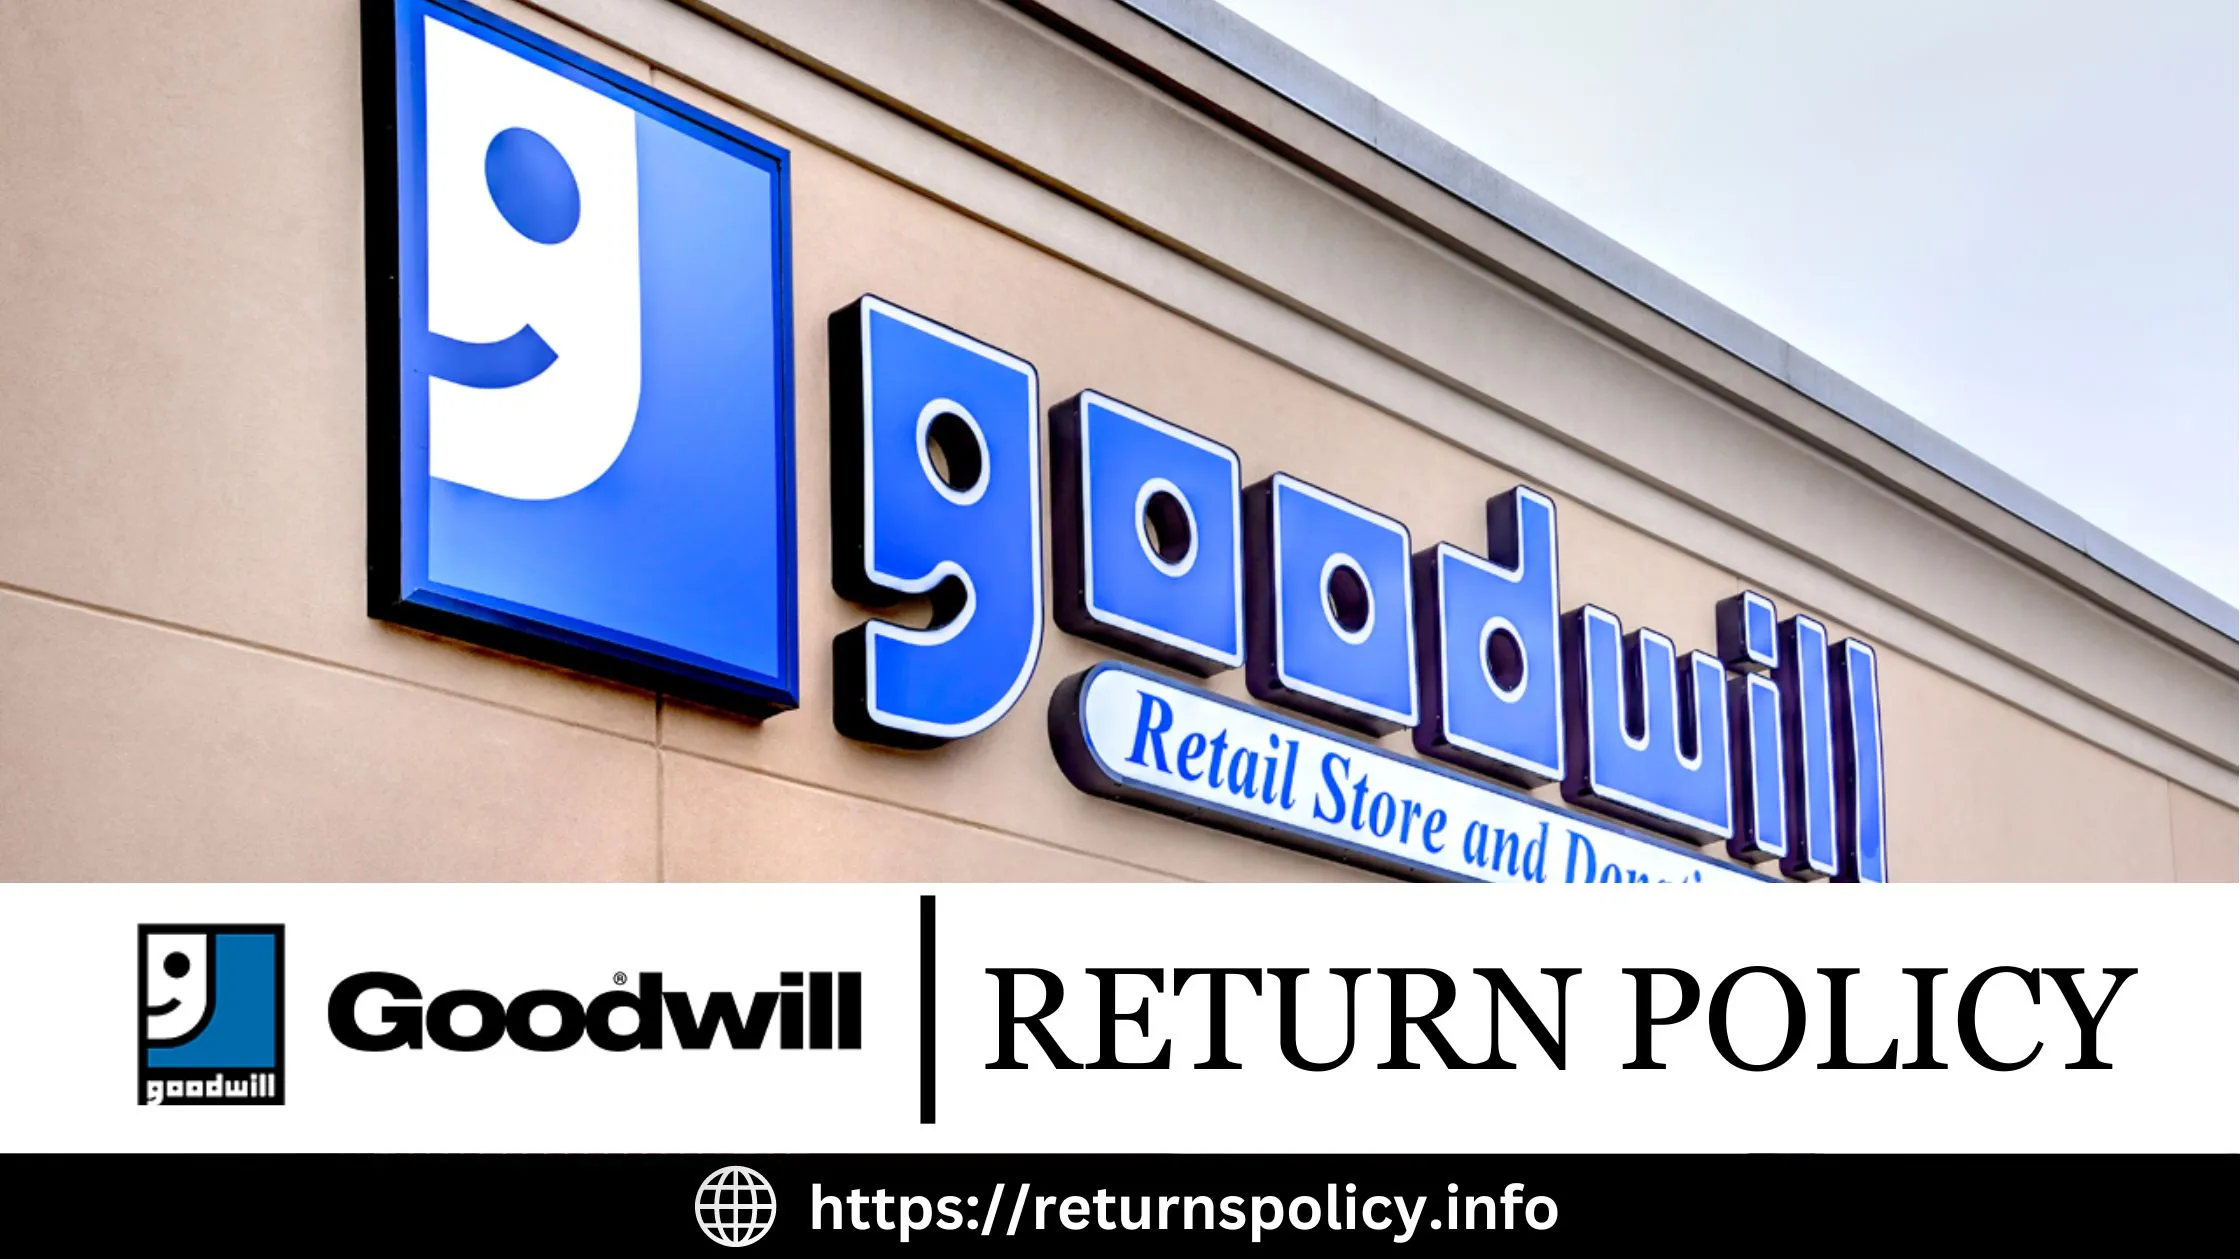 goodwill-RETURN-POLICY_1_